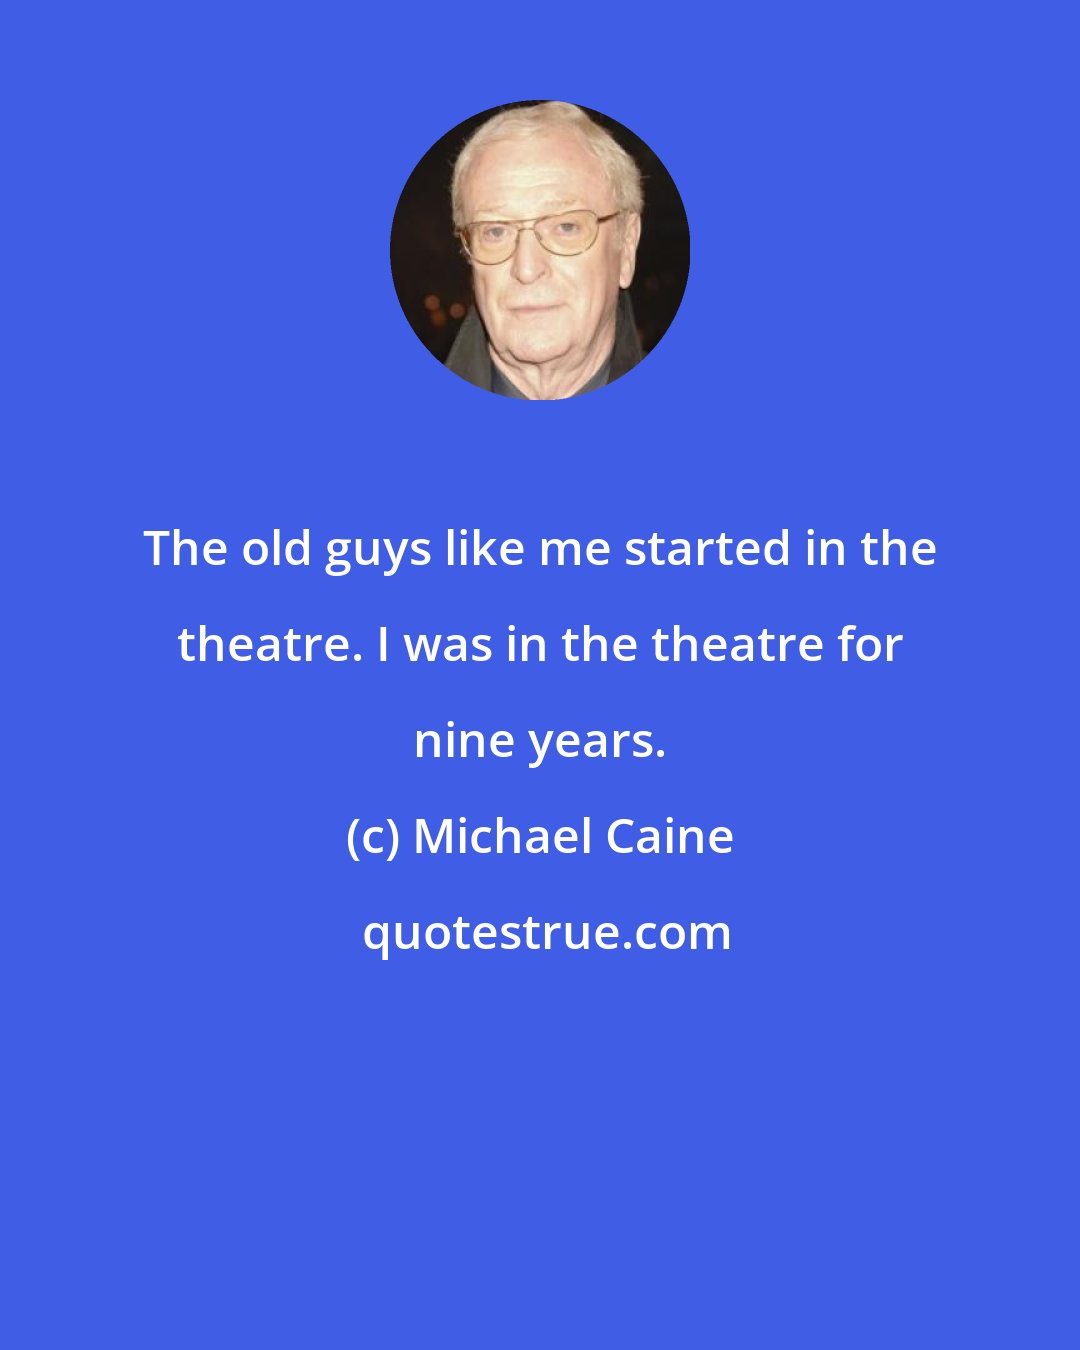 Michael Caine: The old guys like me started in the theatre. I was in the theatre for nine years.